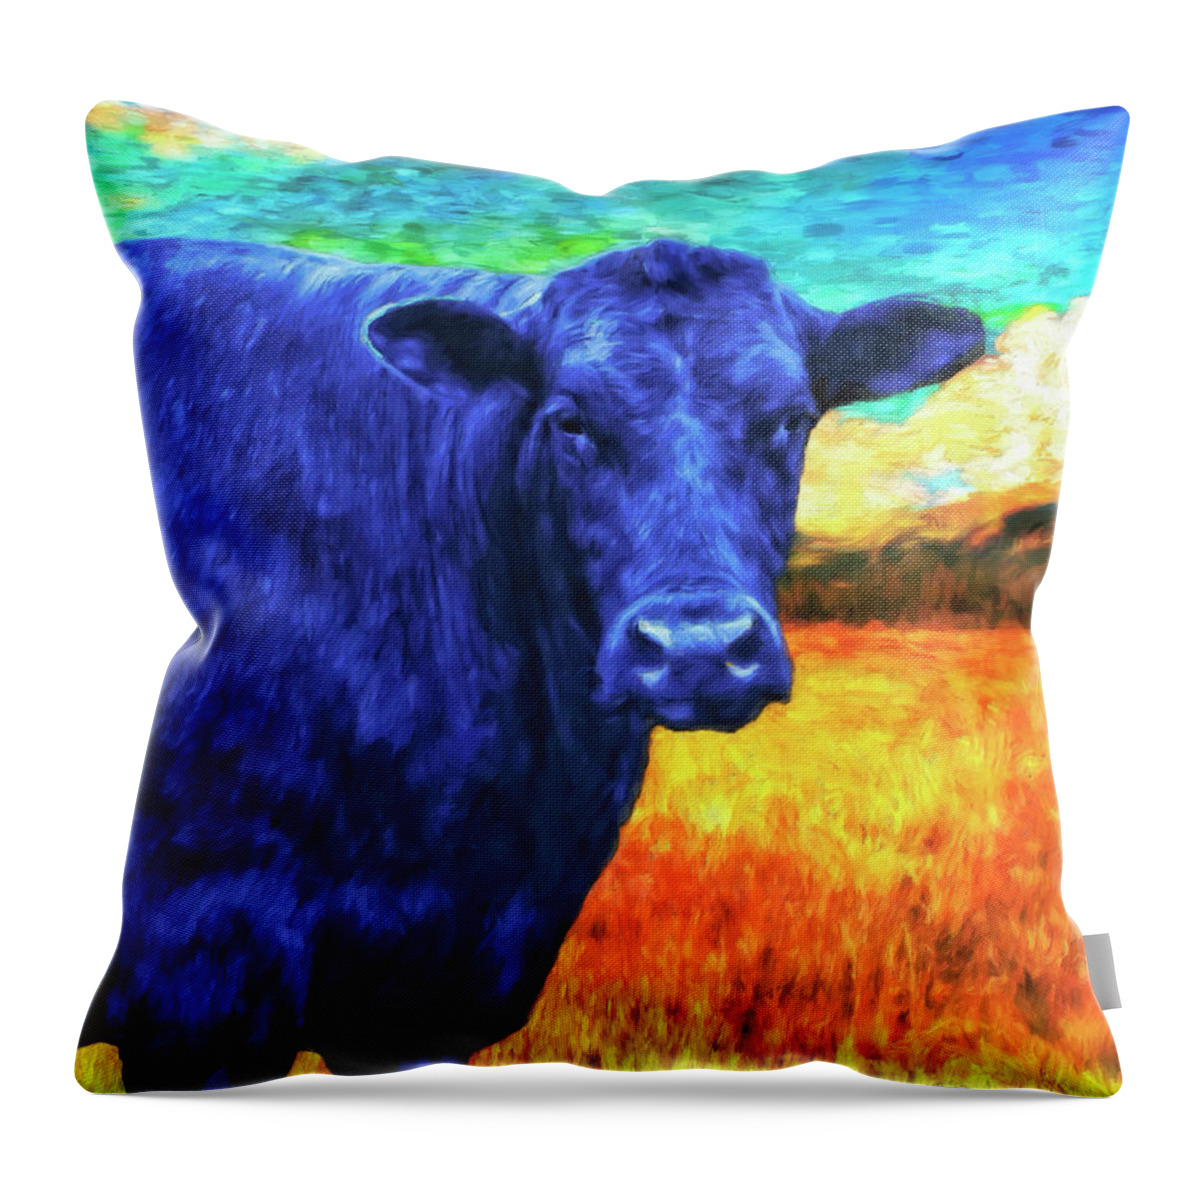 Cow Throw Pillow featuring the painting Montana Blue by Sandra Selle Rodriguez